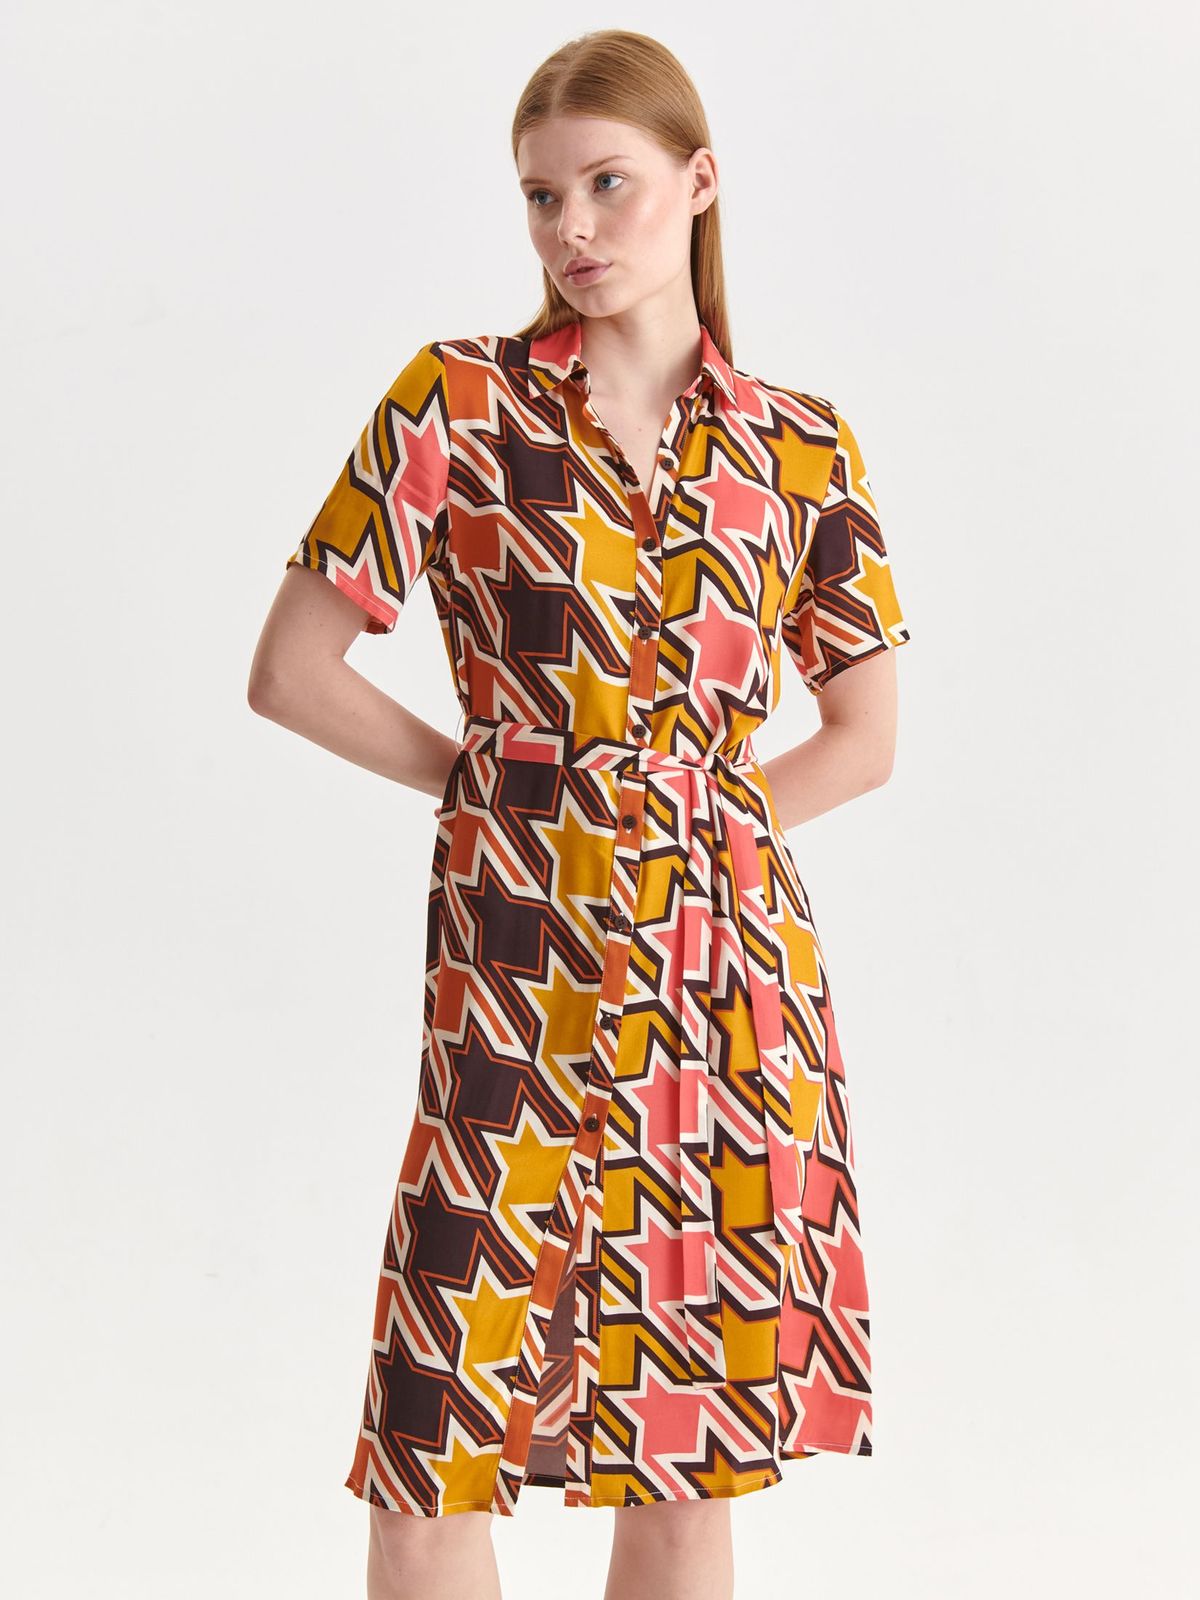 Dress thin fabric shirt dress accessorized with tied waistband abstract